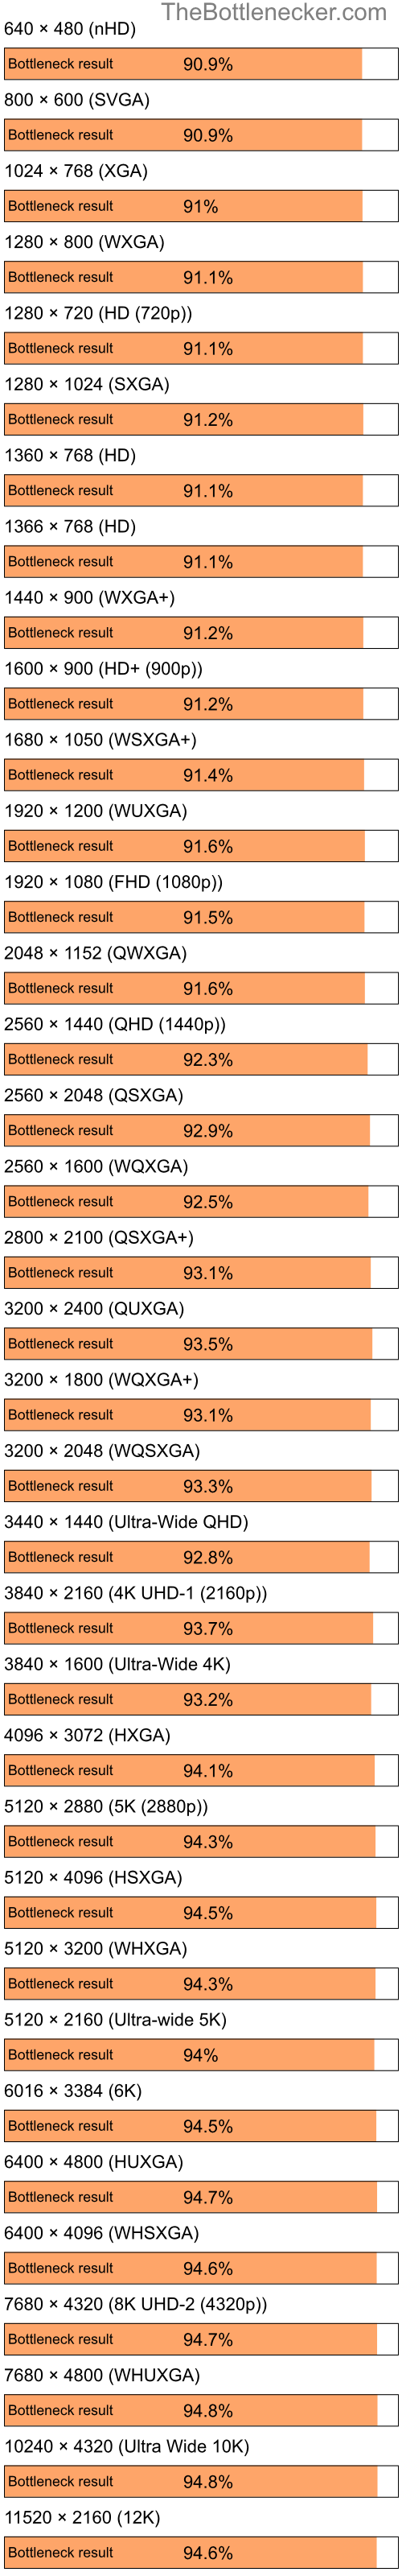 Bottleneck results by resolution for Intel Celeron M 410 and NVIDIA GeForce4 Ti 4600 in Graphic Card Intense Tasks